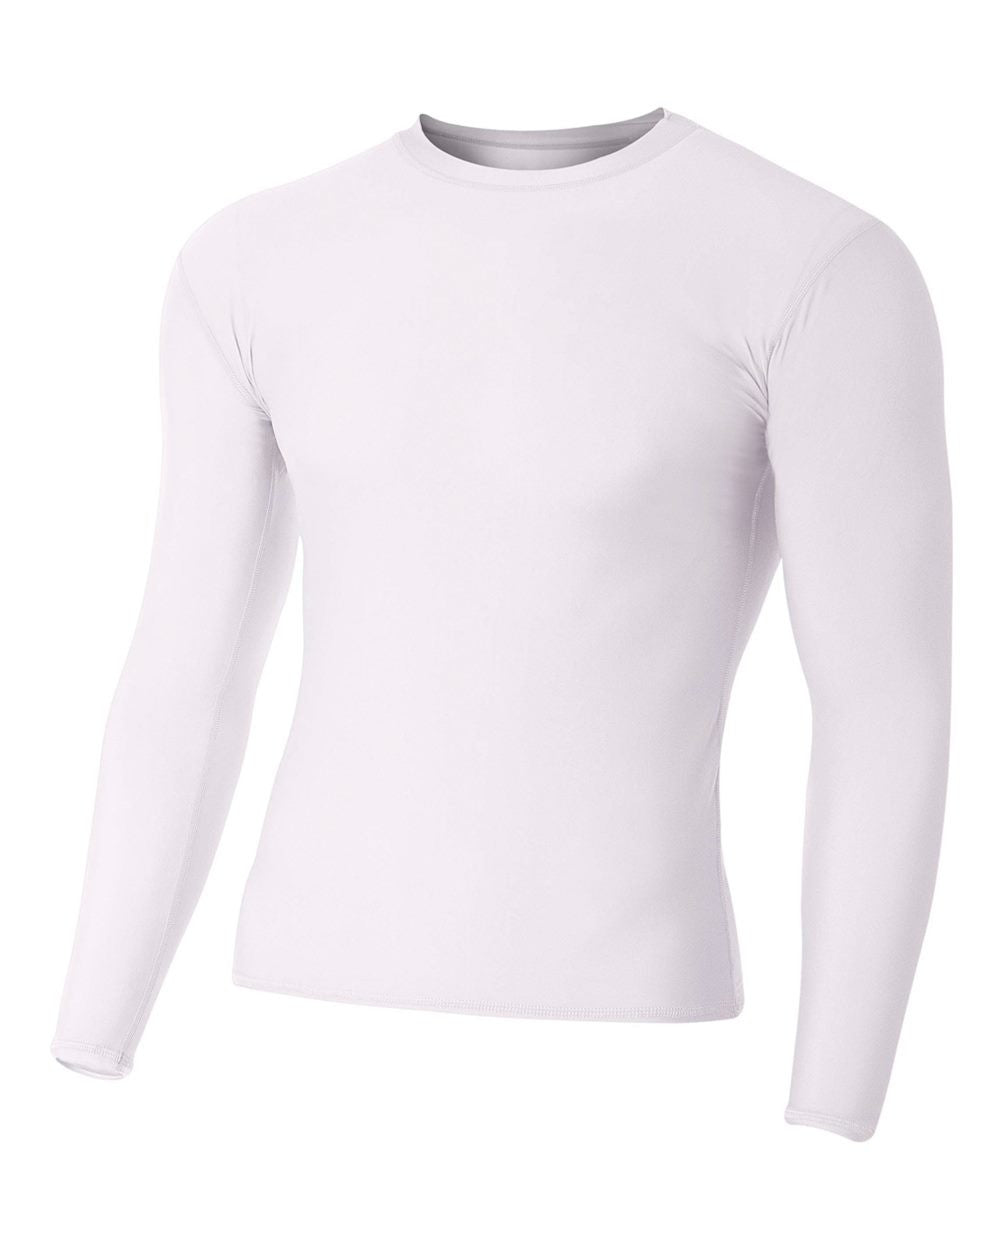 A4 Long Sleeve Cooling Performance Crew Training Wear White Small - Third Coast Soccer